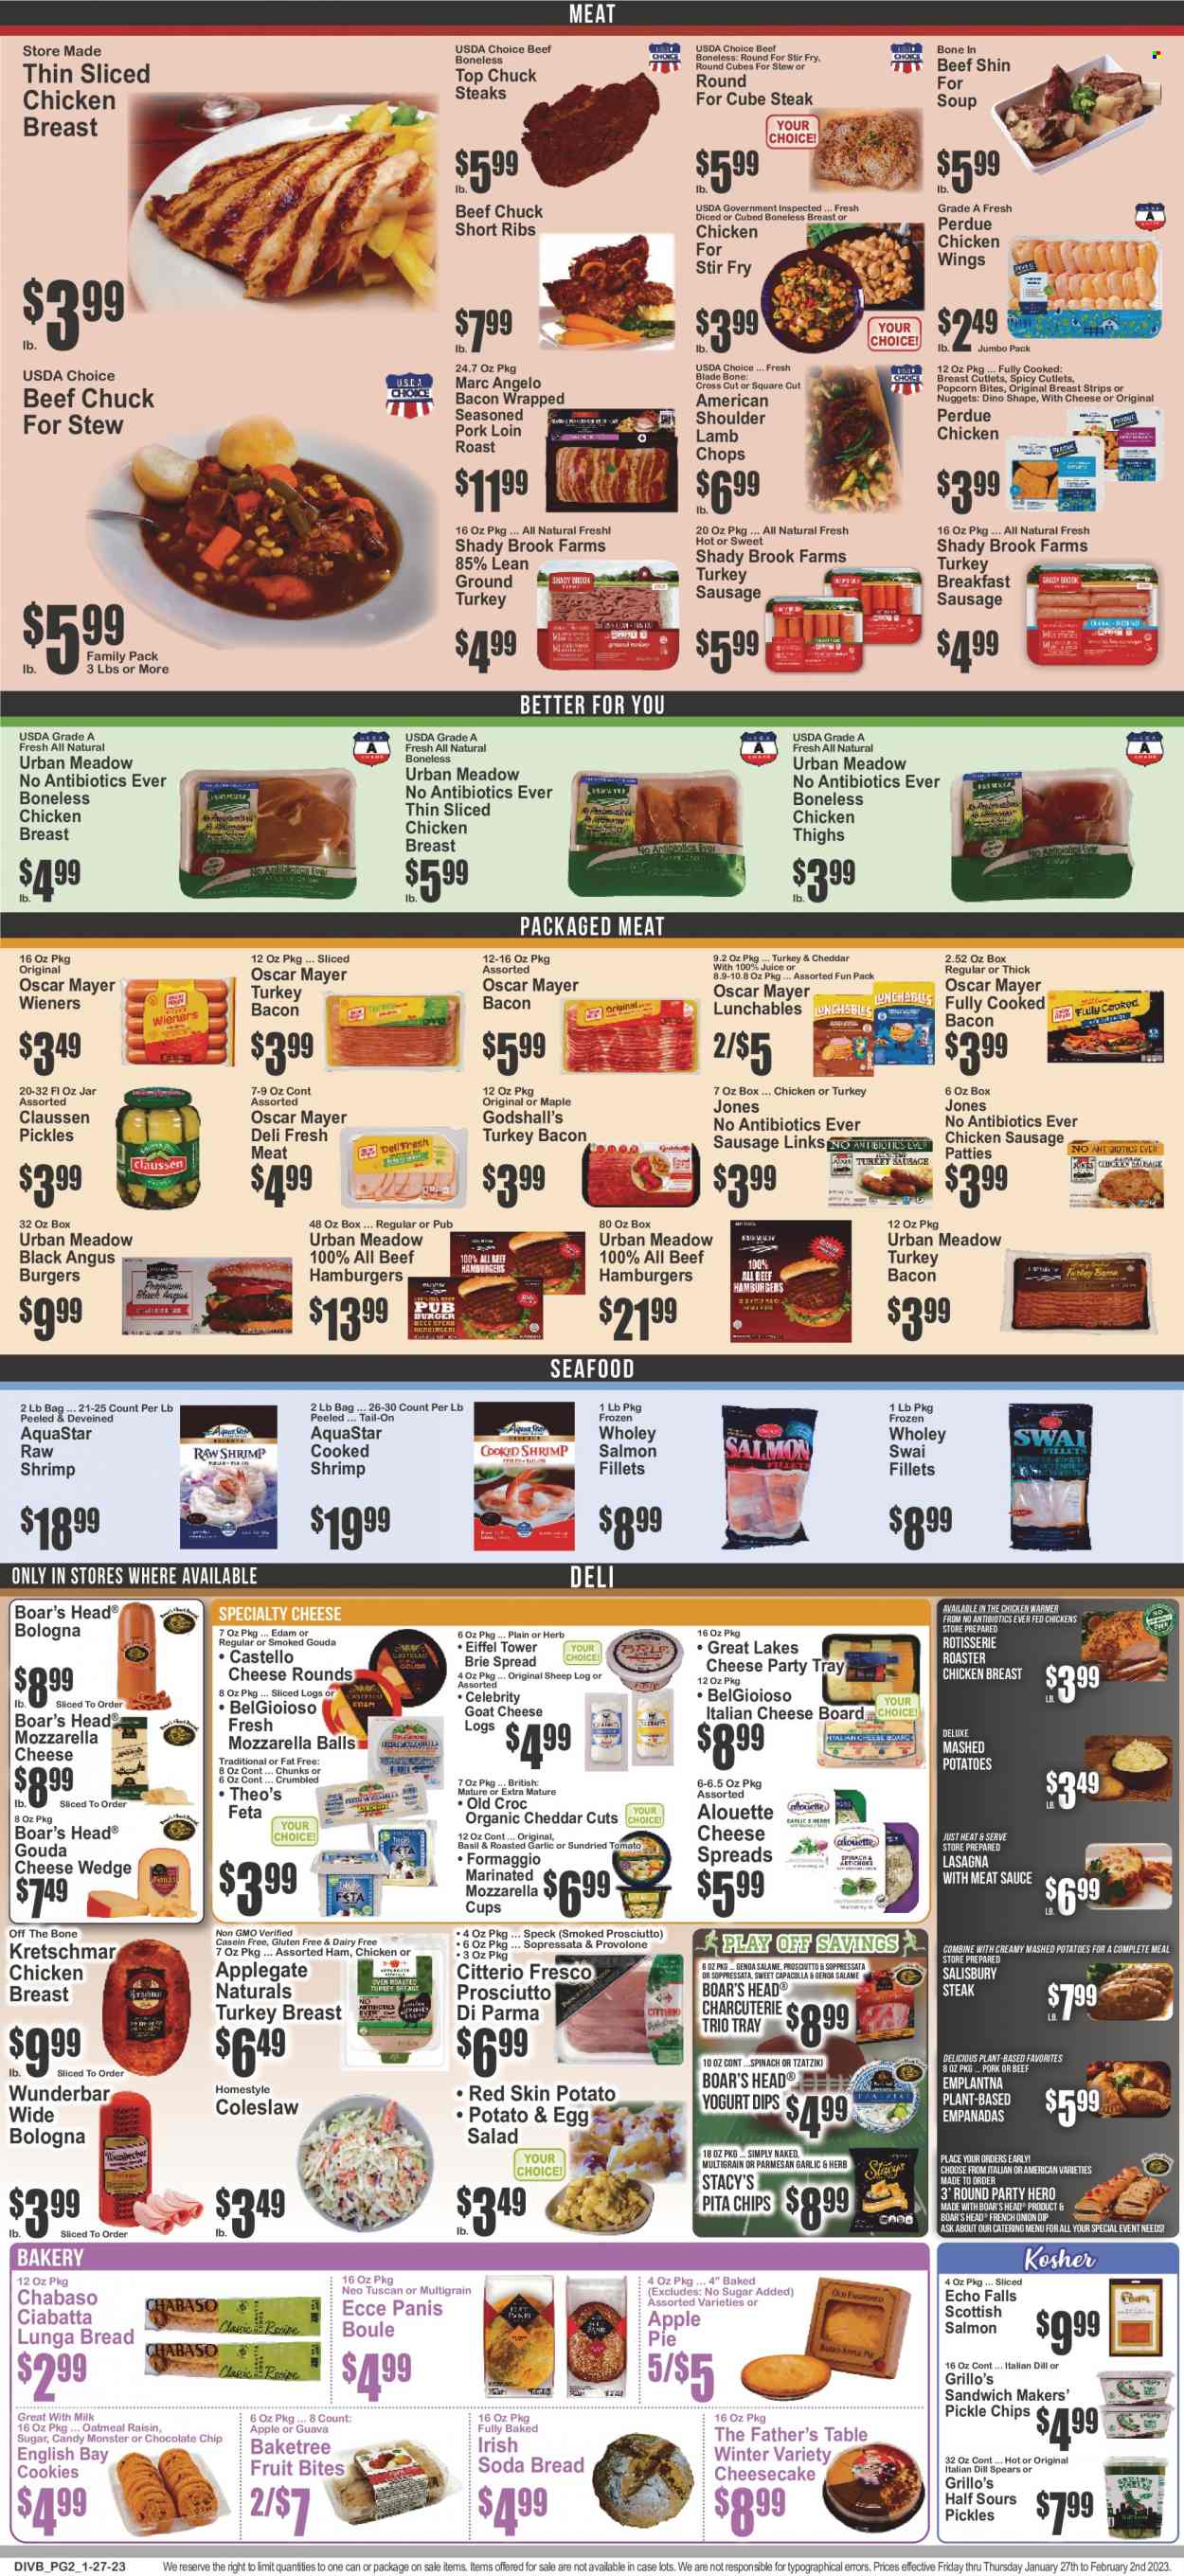 thumbnail - Super Fresh Flyer - 01/27/2023 - 02/02/2023 - Sales products - bread, ciabatta, pie, soda bread, Father's Table, apple pie, cheesecake, salad, guava, salmon, salmon fillet, seafood, shrimps, swai fillet, coleslaw, mashed potatoes, soup, nuggets, hamburger, sauce, lasagna meal, Perdue®, Lunchables, empanadas, bacon, soppressata, turkey bacon, ham, prosciutto, bologna sausage, Oscar Mayer, sausage, chicken sausage, tzatziki, edam cheese, goat cheese, gouda, mozzarella, parmesan, brie, feta, Provolone, yoghurt, milk, eggs, dip, chicken wings, strips, cookies, popcorn, pita chips, oatmeal, pickles, dill, juice, Monster, ground turkey, chicken breasts, chicken thighs, beef meat, steak, roast beef, ribs, pork loin, pork meat, lamb chops, lamb meat. Page 2.